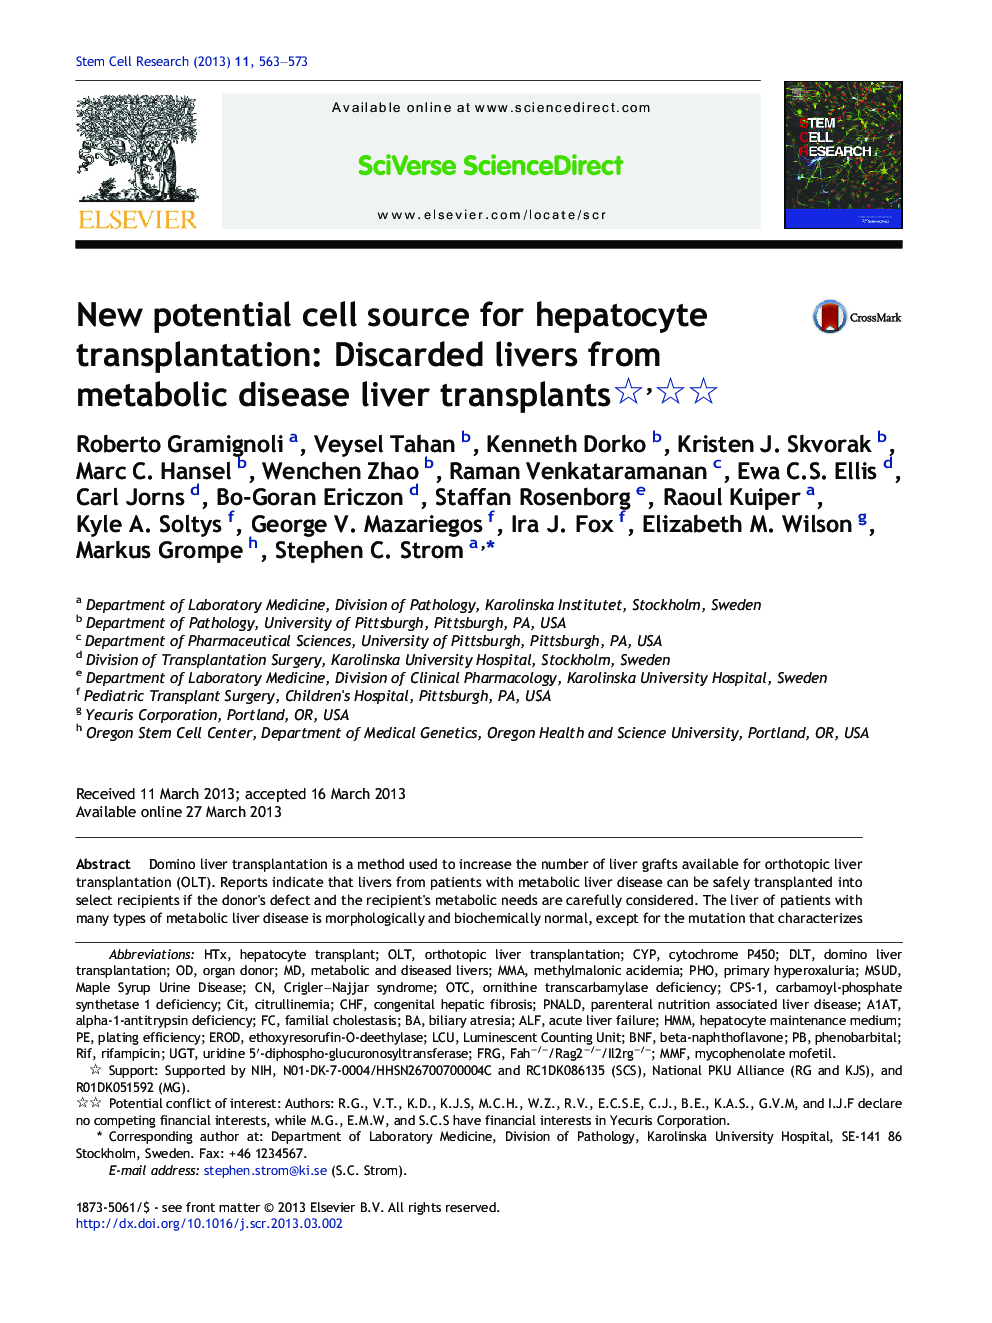 New potential cell source for hepatocyte transplantation: Discarded livers from metabolic disease liver transplants